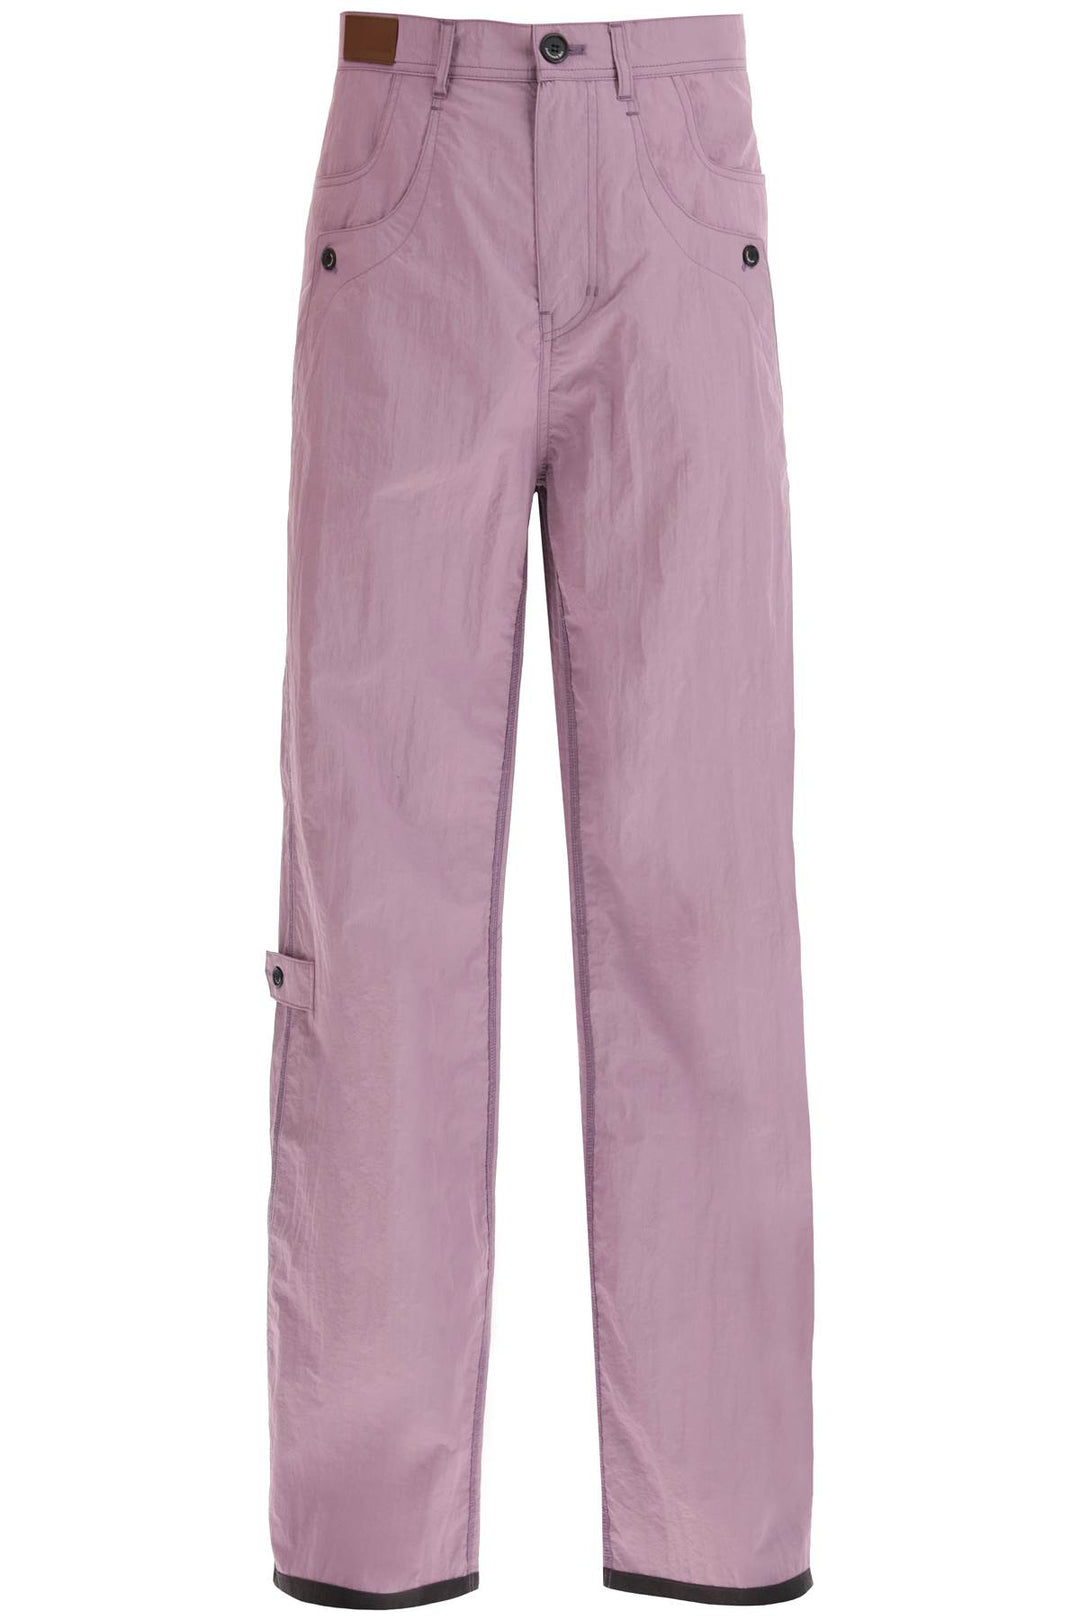 Andersson Bell Inside Out Technical Pants   Viola